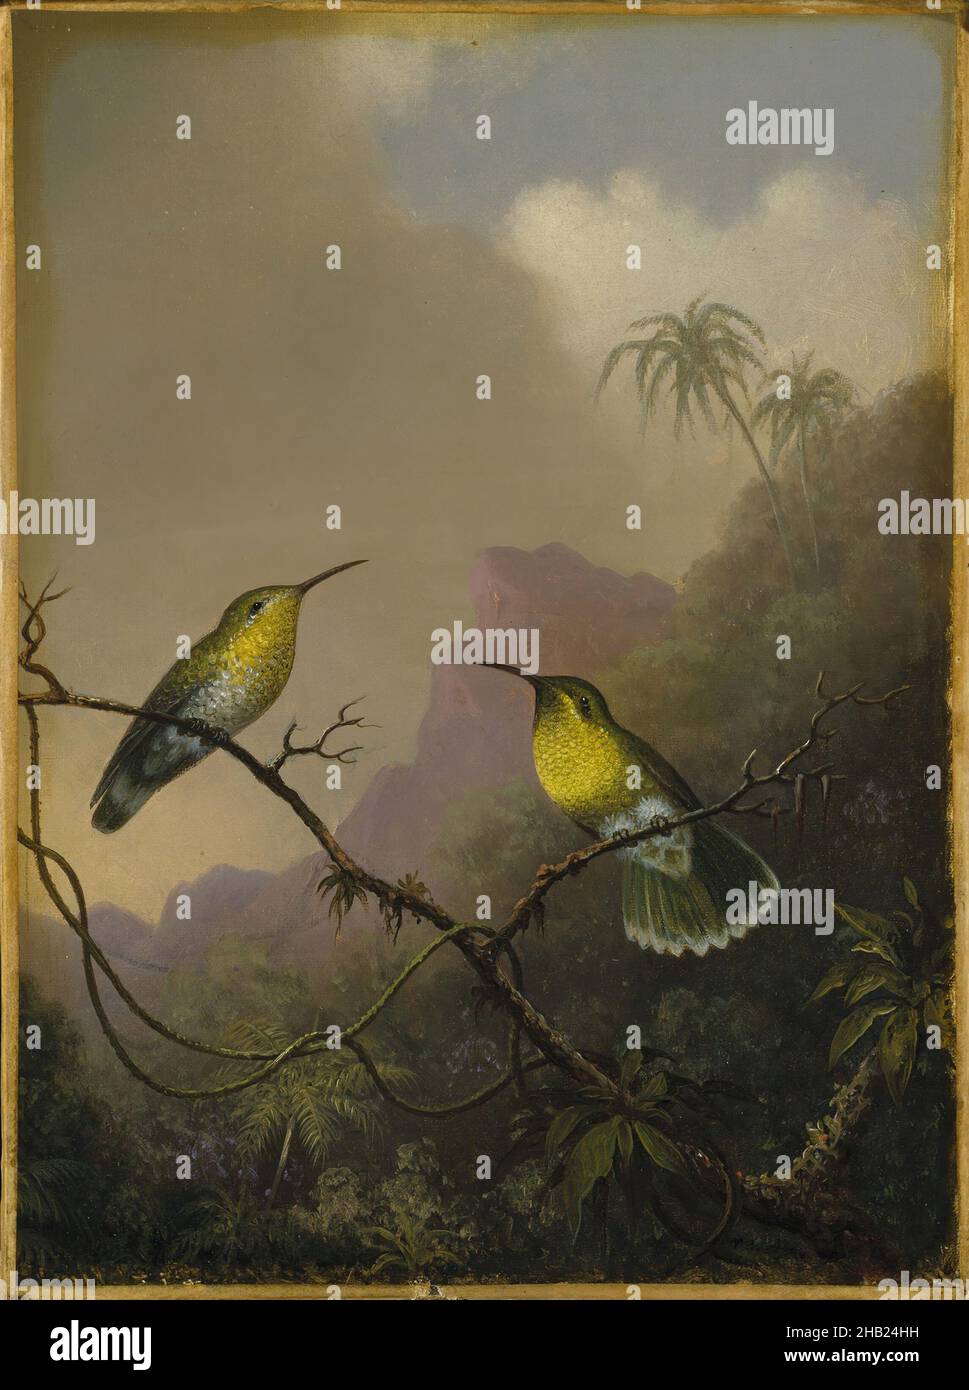 Two Humming Birds: 'Copper-tailed Amazili', Martin Johnson Heade, American, 1819-1904, Oil on canvas, ca.1865-1875, 11 9/16 x 8 7/16 in., 29.3 x 21.5 cm, American Painting, animal, birds, branches, clouds, Copper-tailed Amzaiii, humming birds, hummingbirds, Johnson Heade, landscape, Martin Johnson Heade, mid 19th century painting, oil, oiseau, oiseau-mouche, painting, purple mountains, sky, trees, tropical, x-ray, yellow Stock Photo